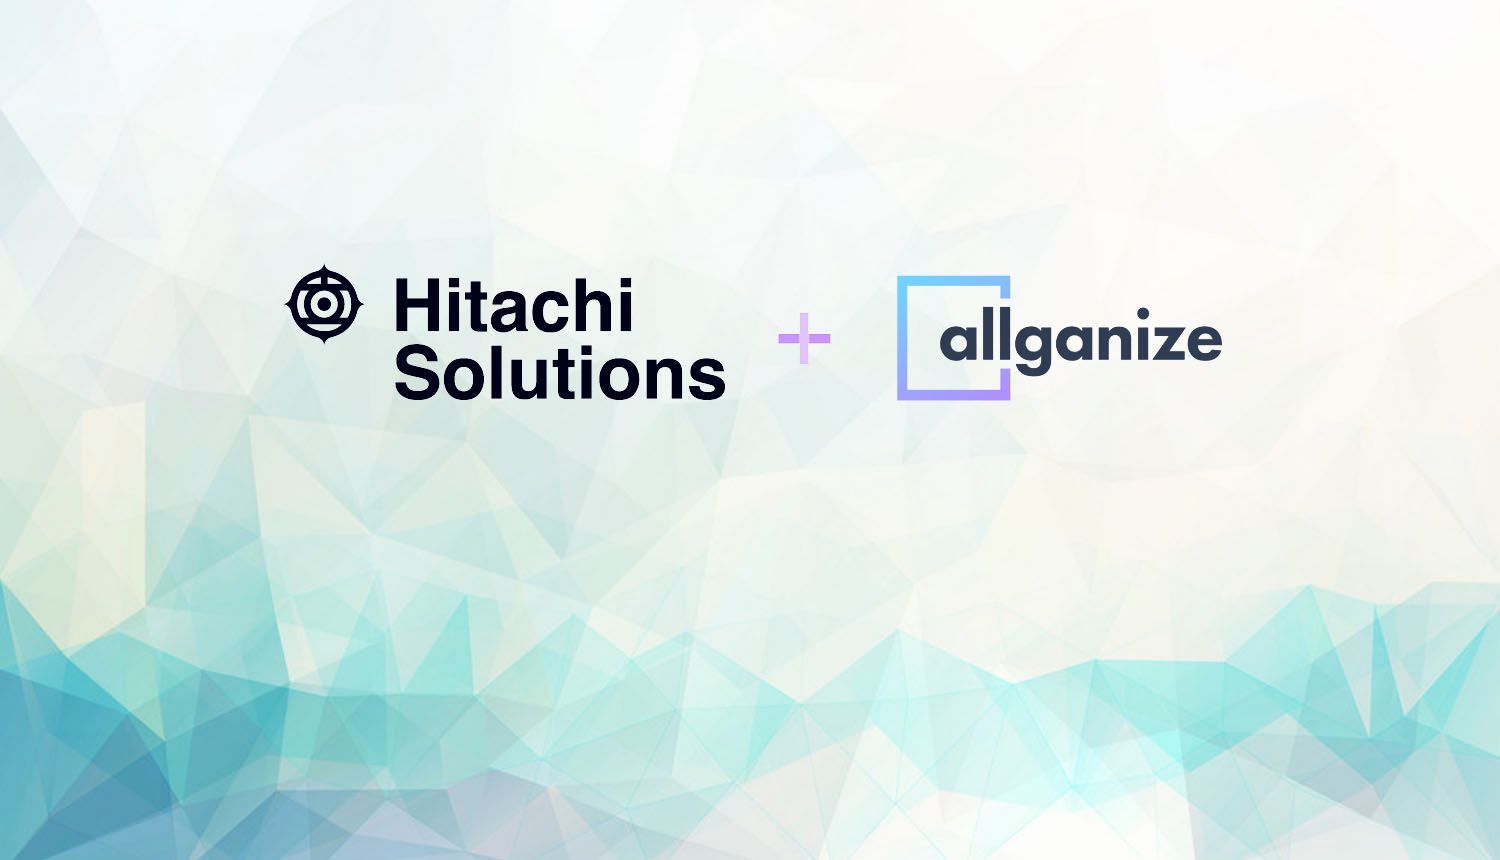 Hitachi Solutions, Ltd. and Allganize Join Forces to Transform Enterprise Automation with AI